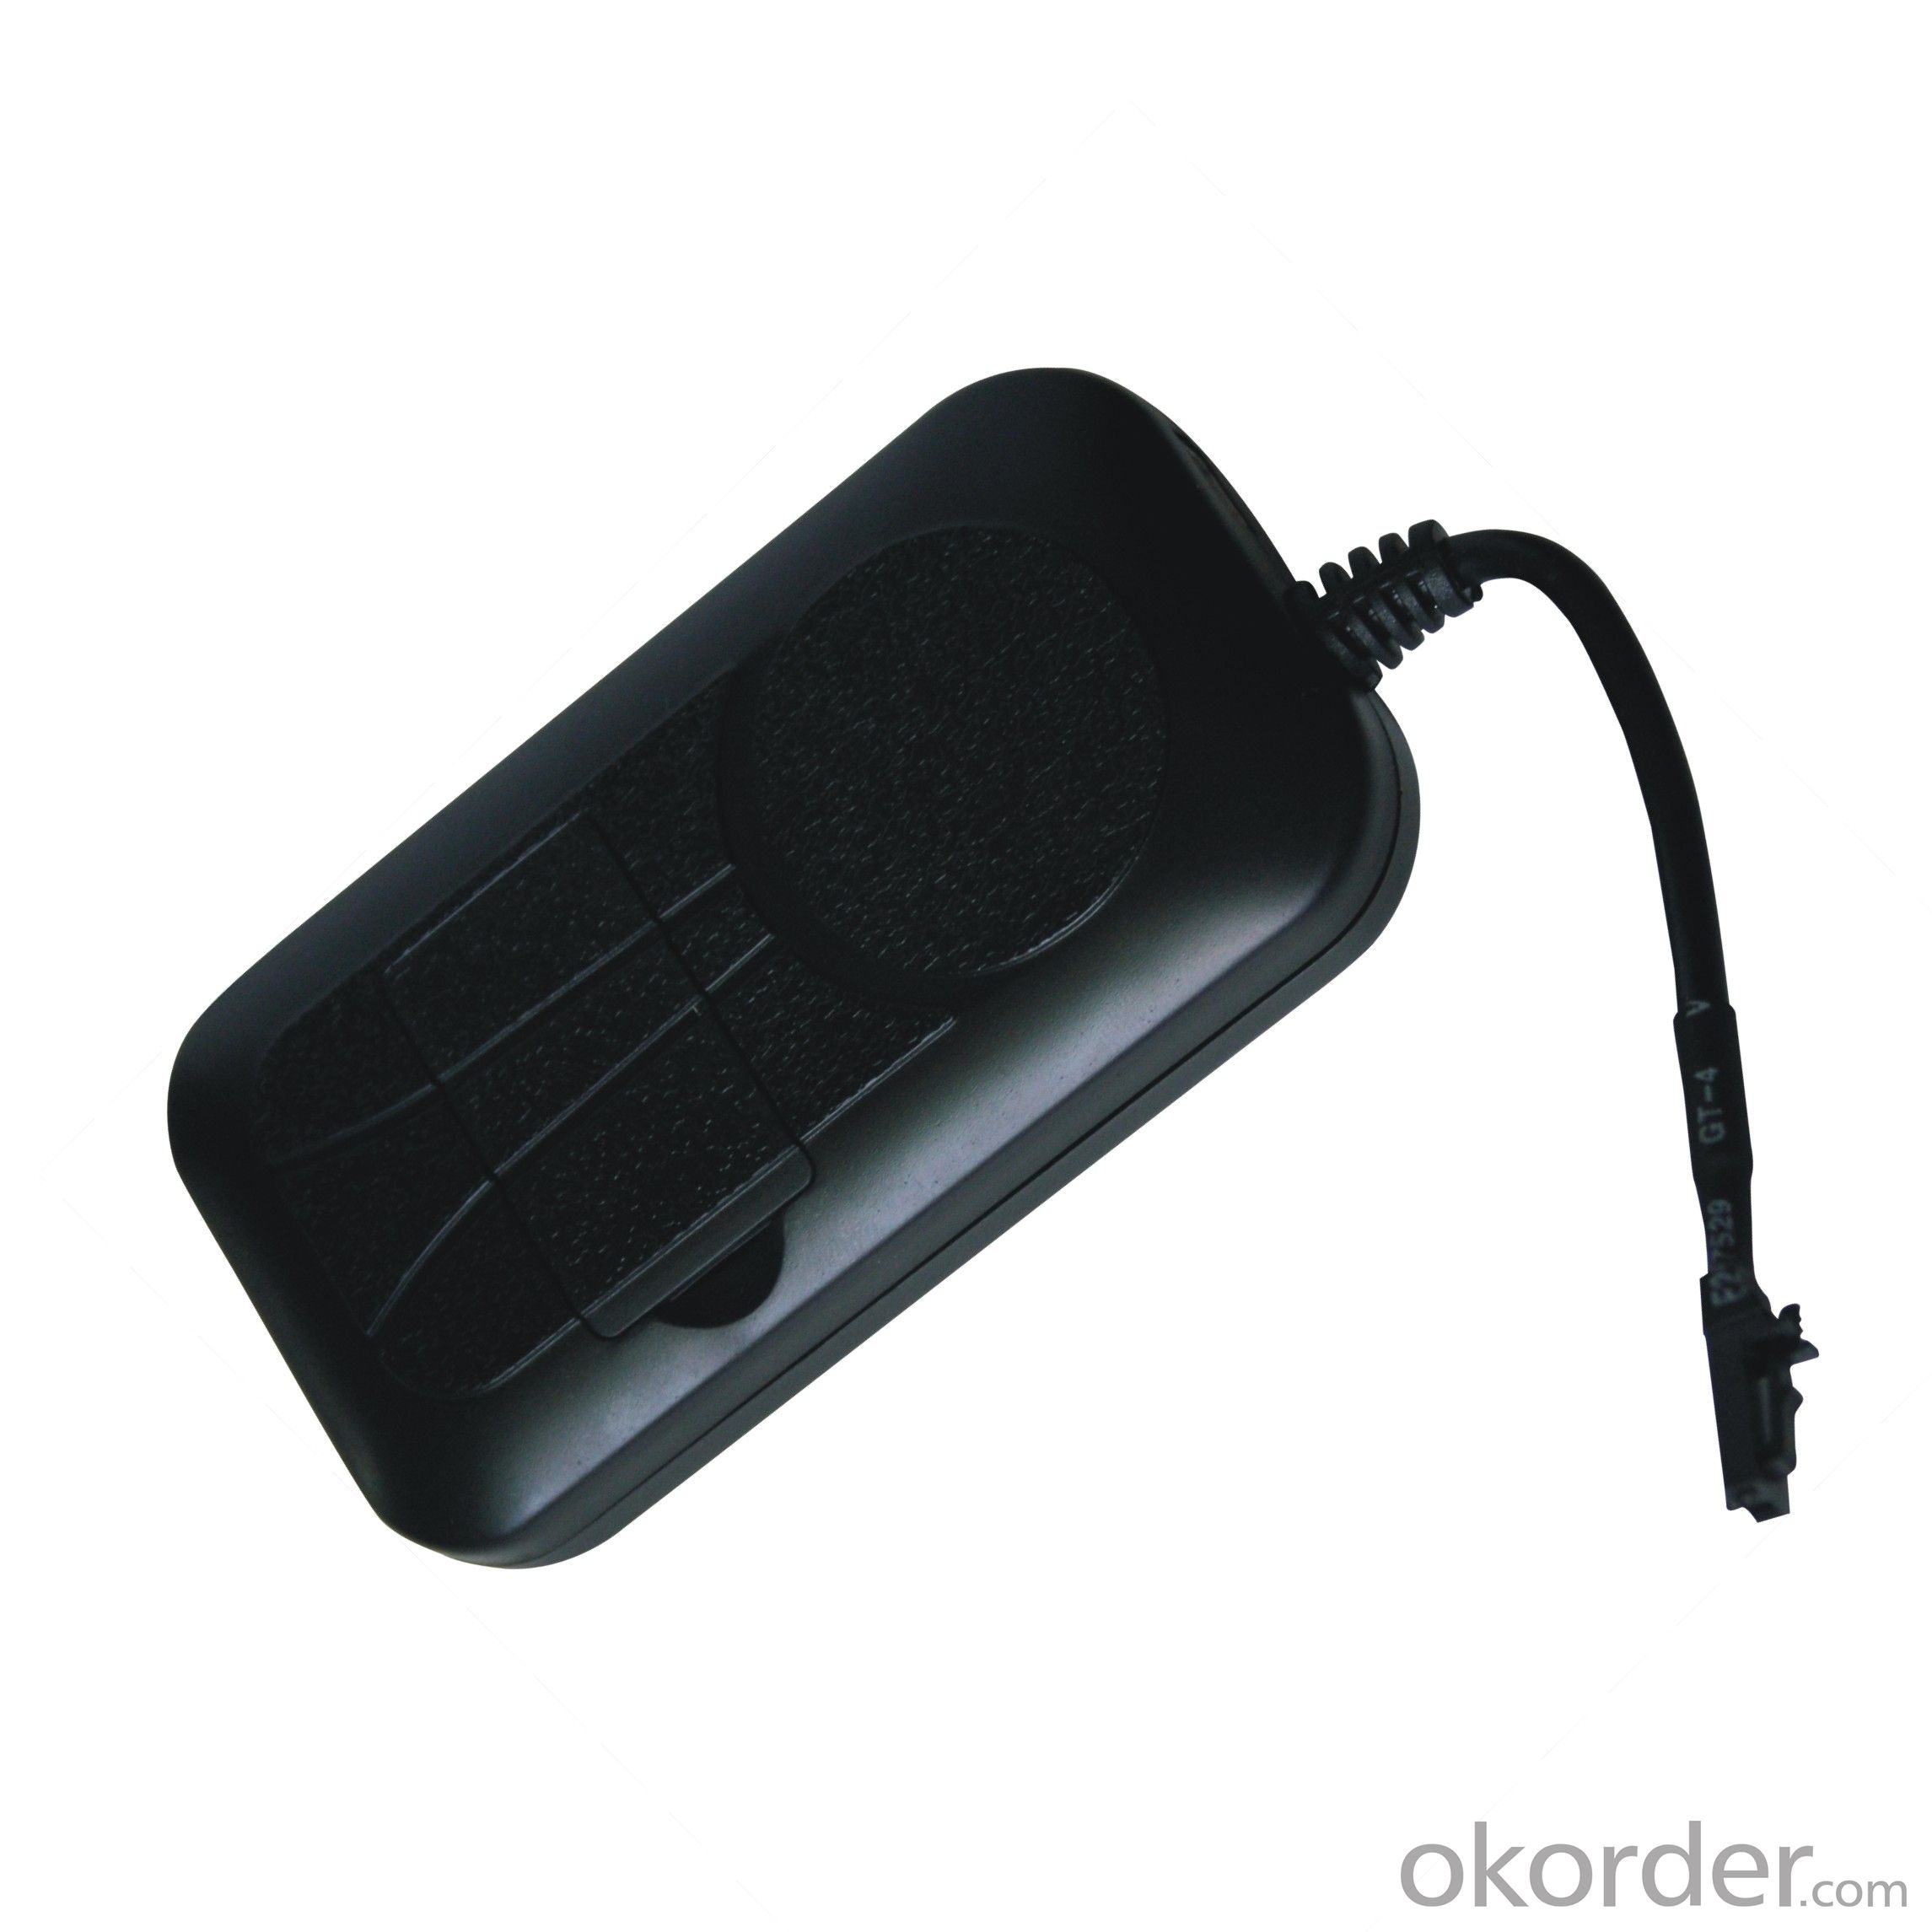 MT803 Personal GPS Tracker for Kids Old people